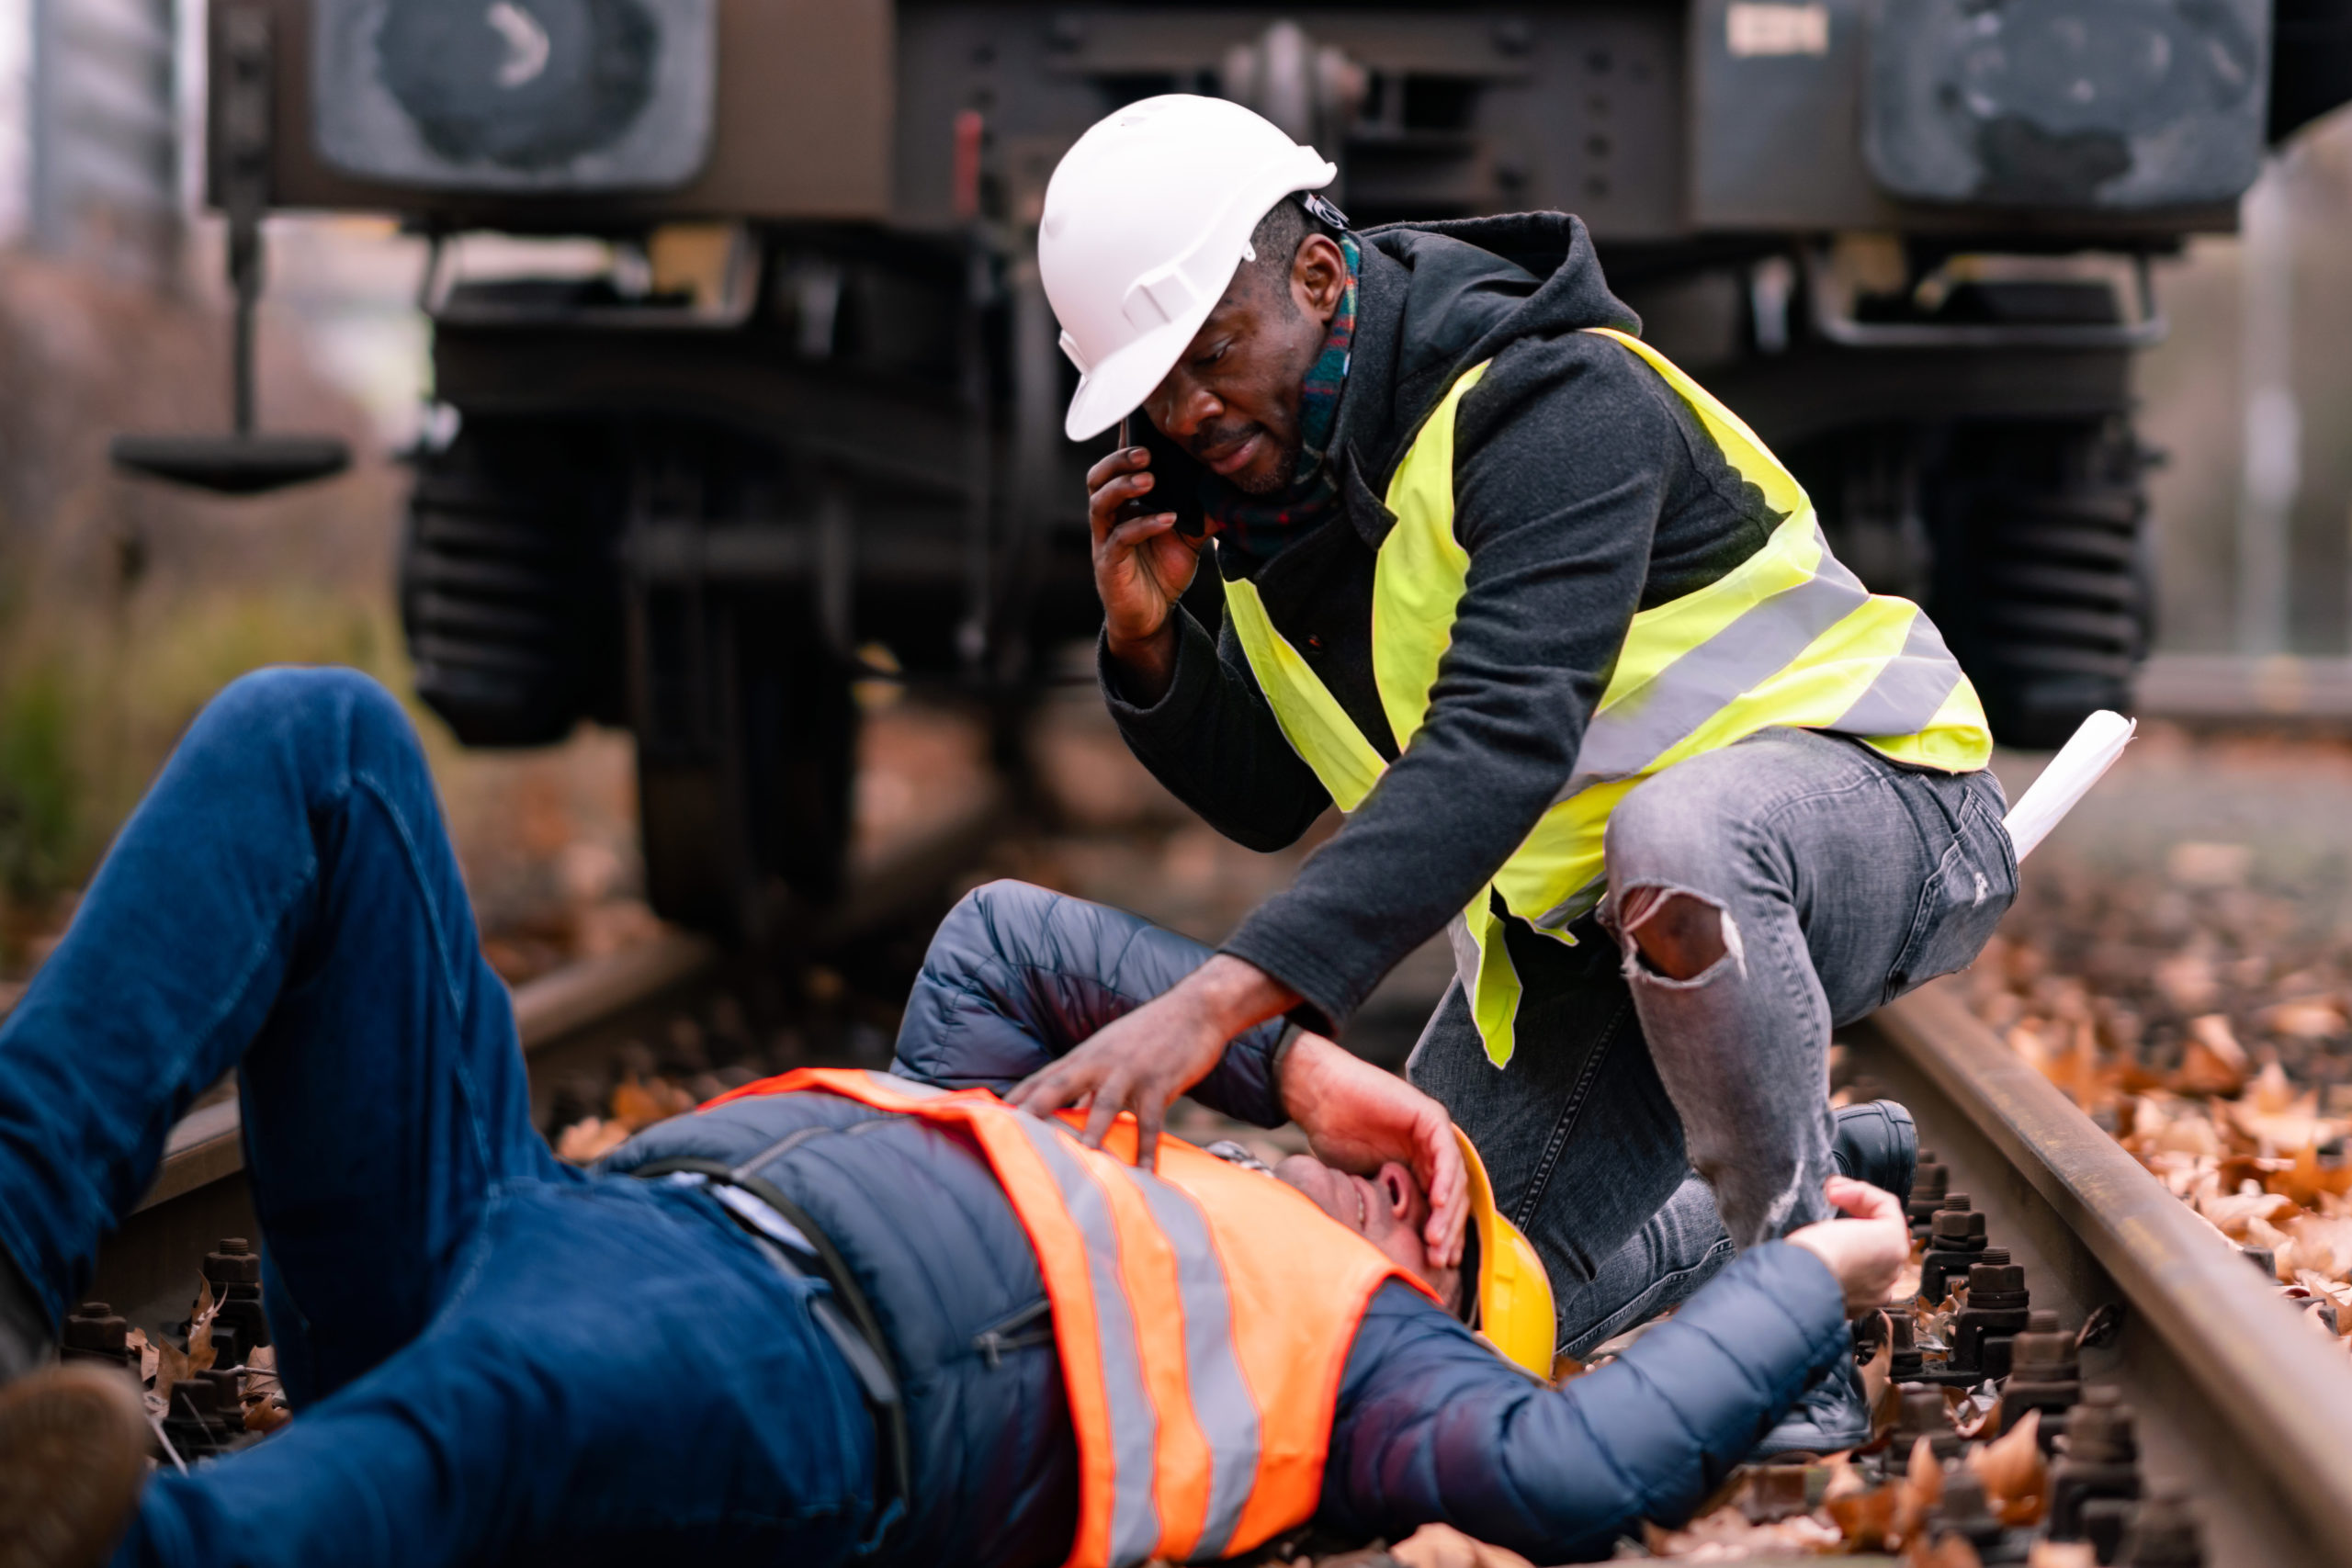 Railroad engineer injured in an accident at work. Railroad engin